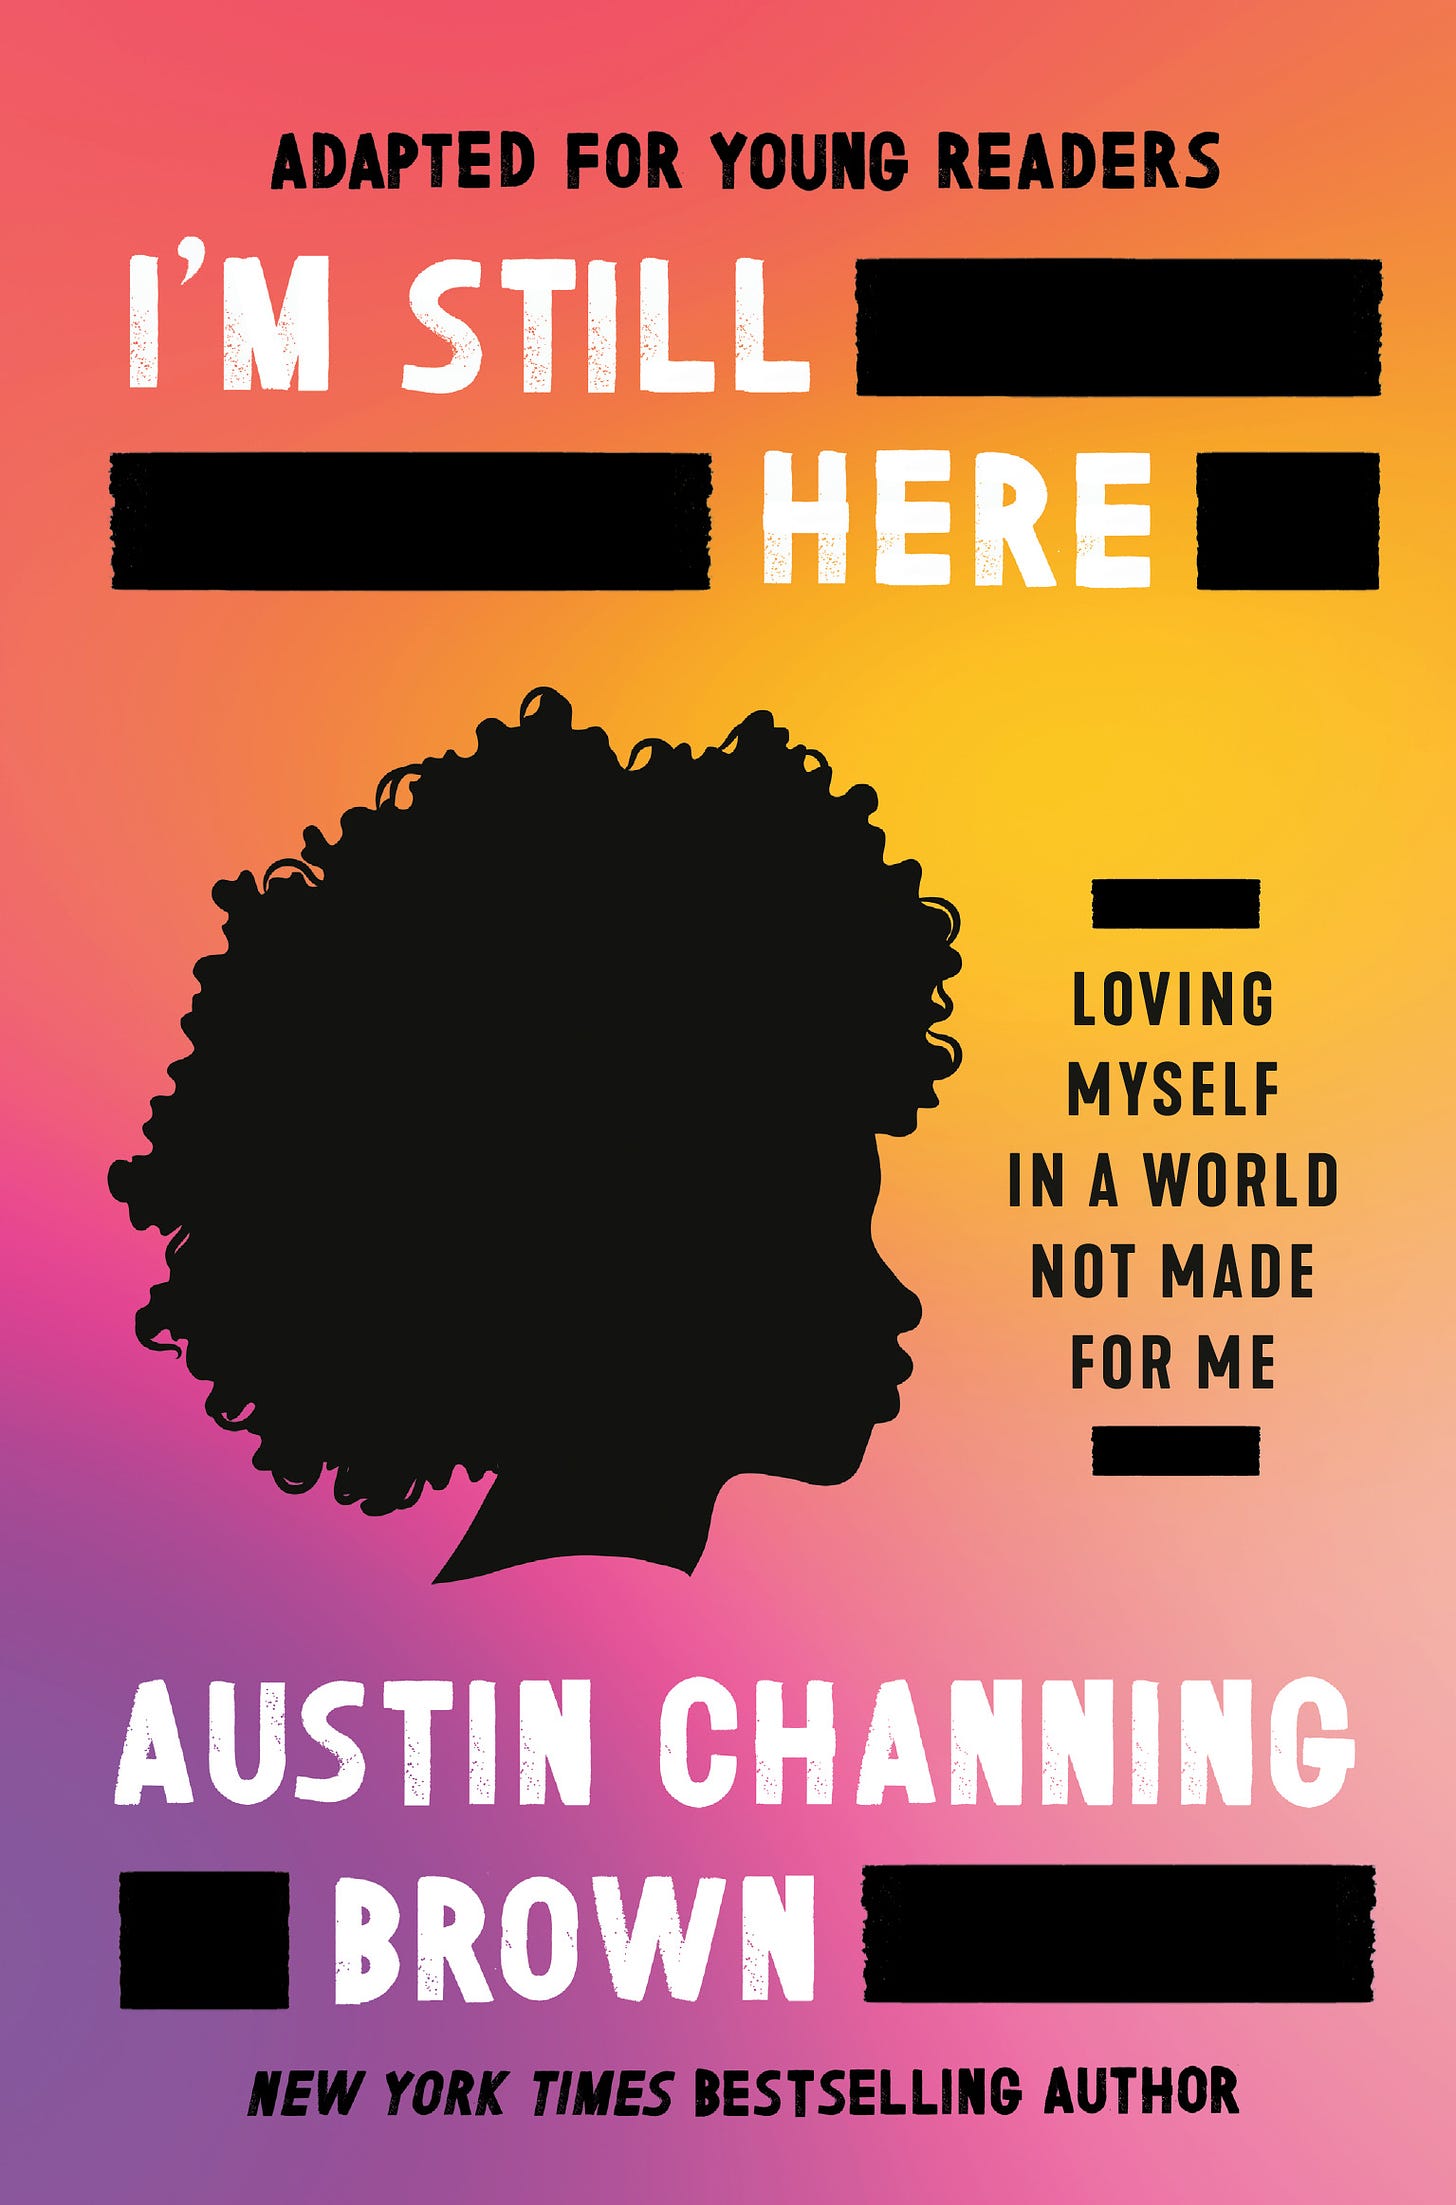 Cover of Austin Channing Brown's book I'm Still Here: Staying Yourself In A World Made For Whiteness. Image of a Black girl's profile